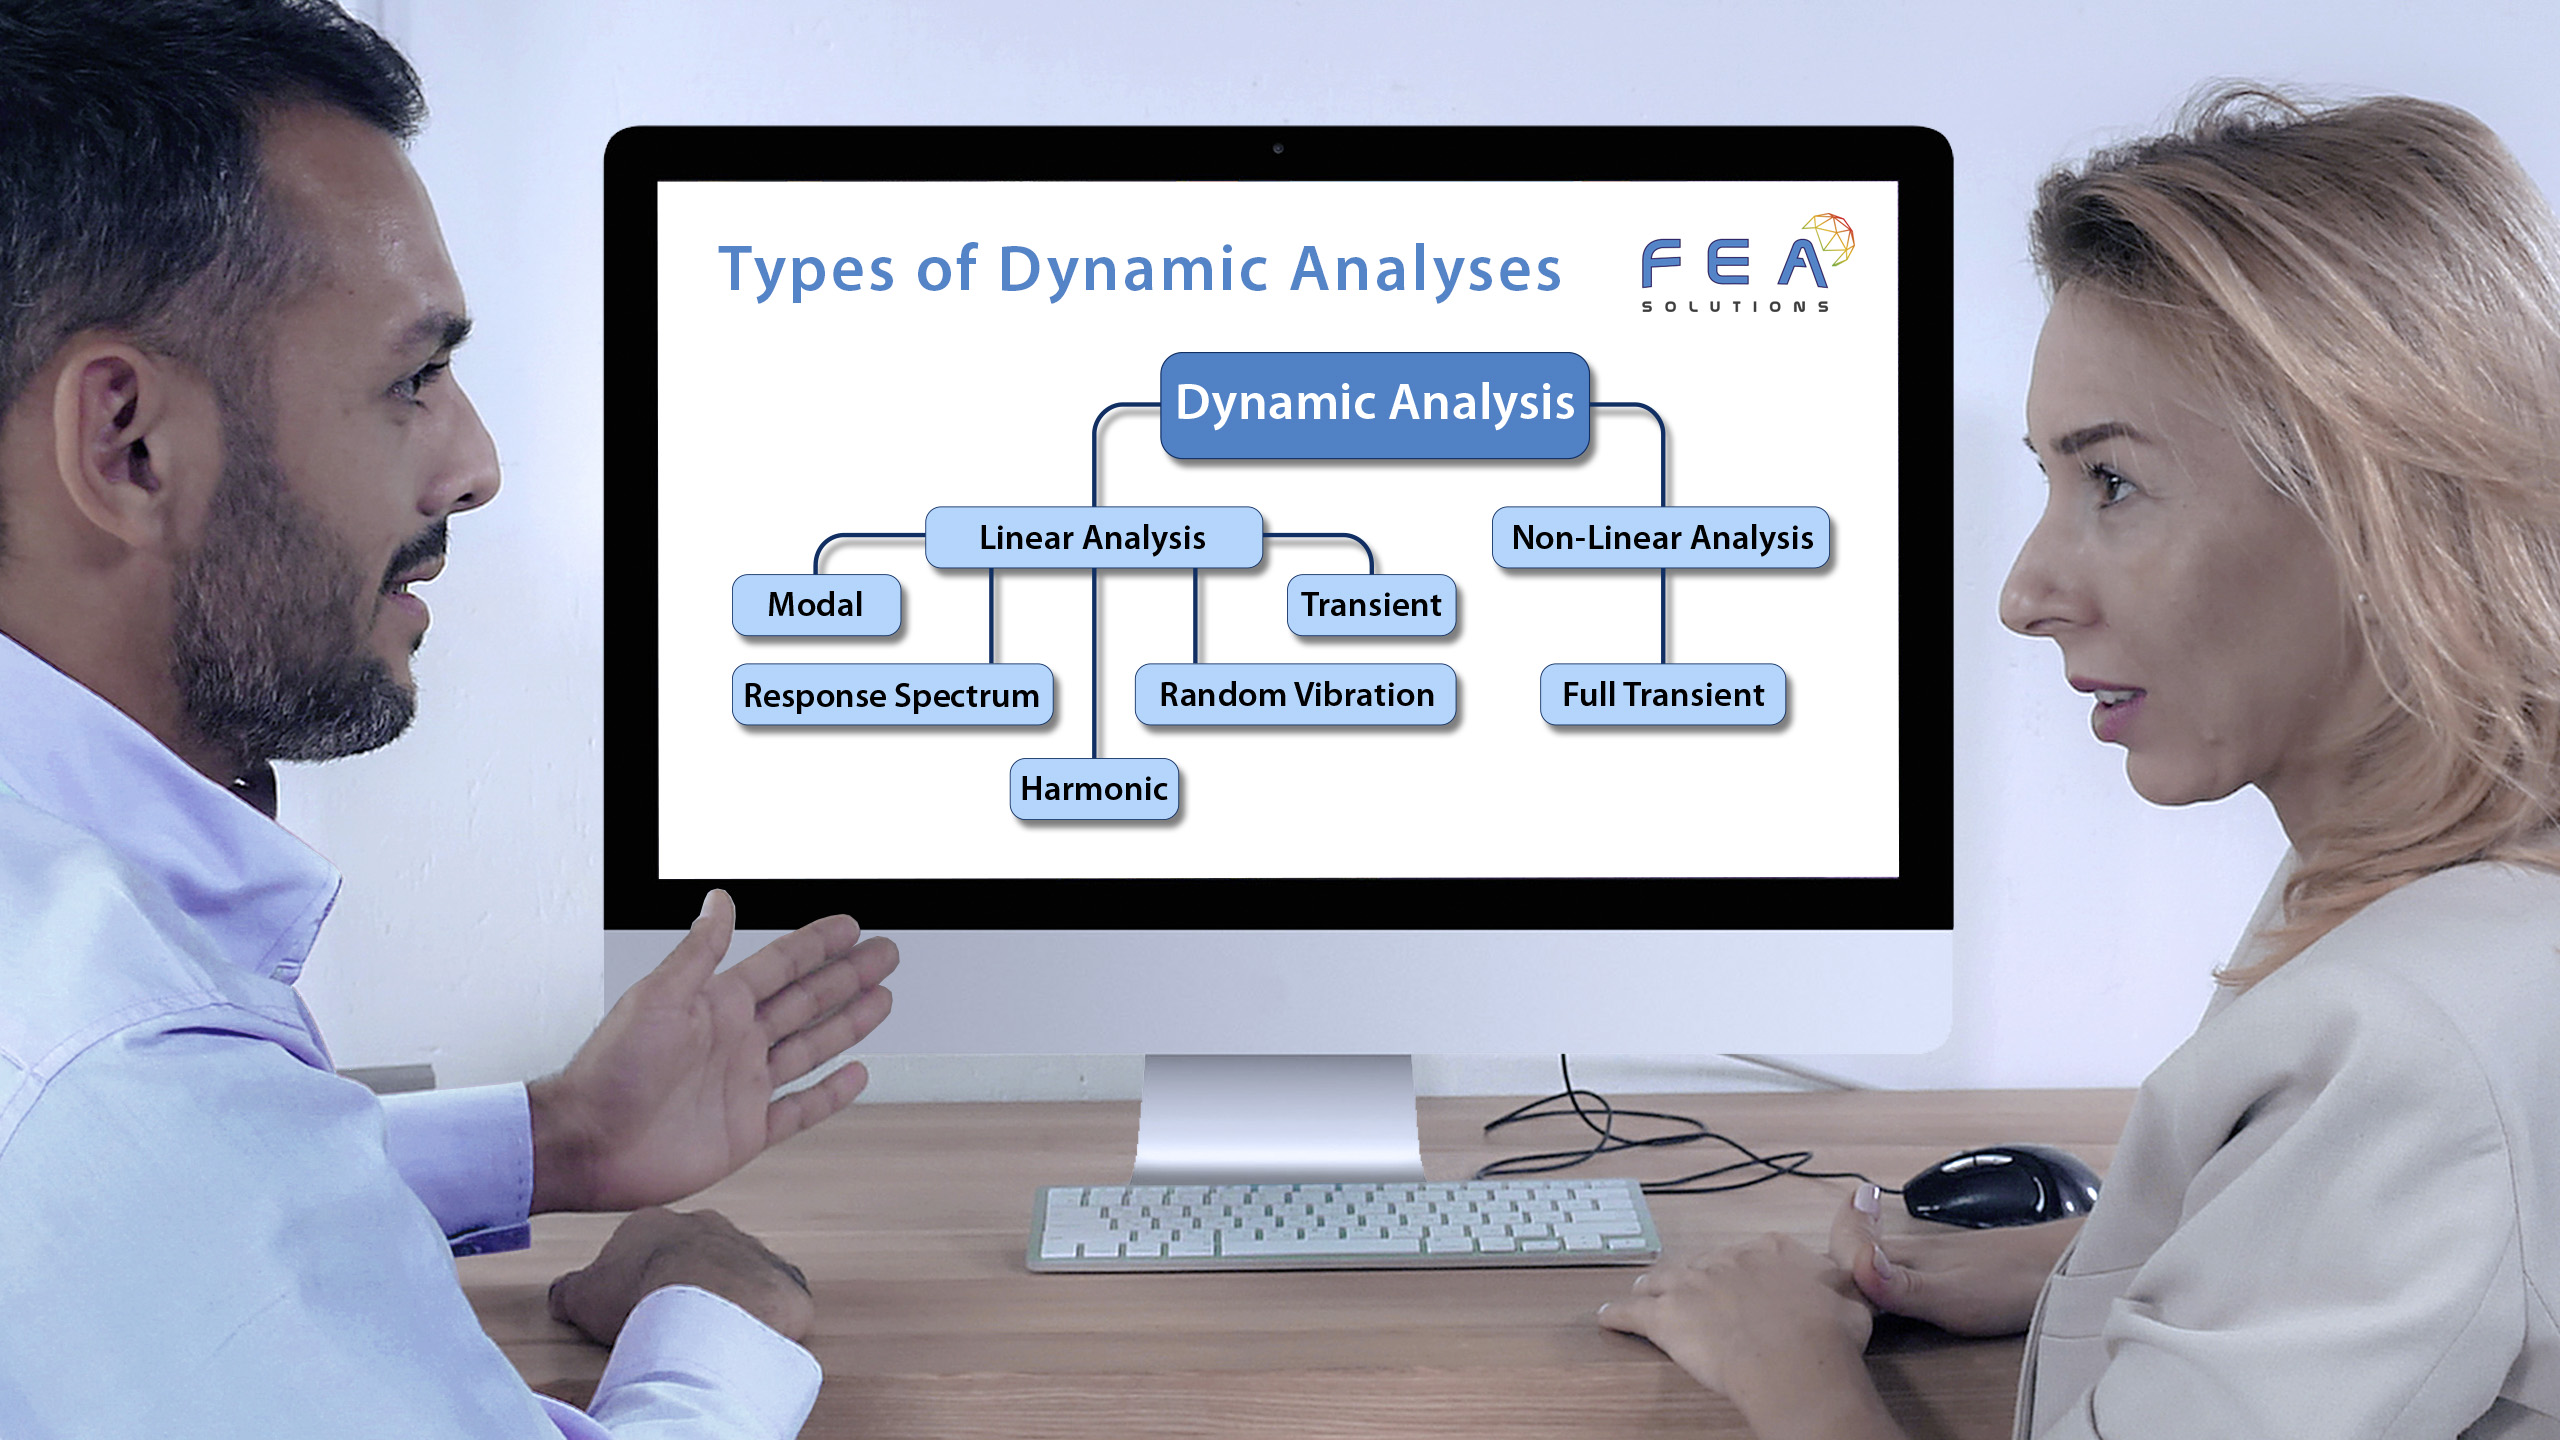 types of dynamic analyses infographic